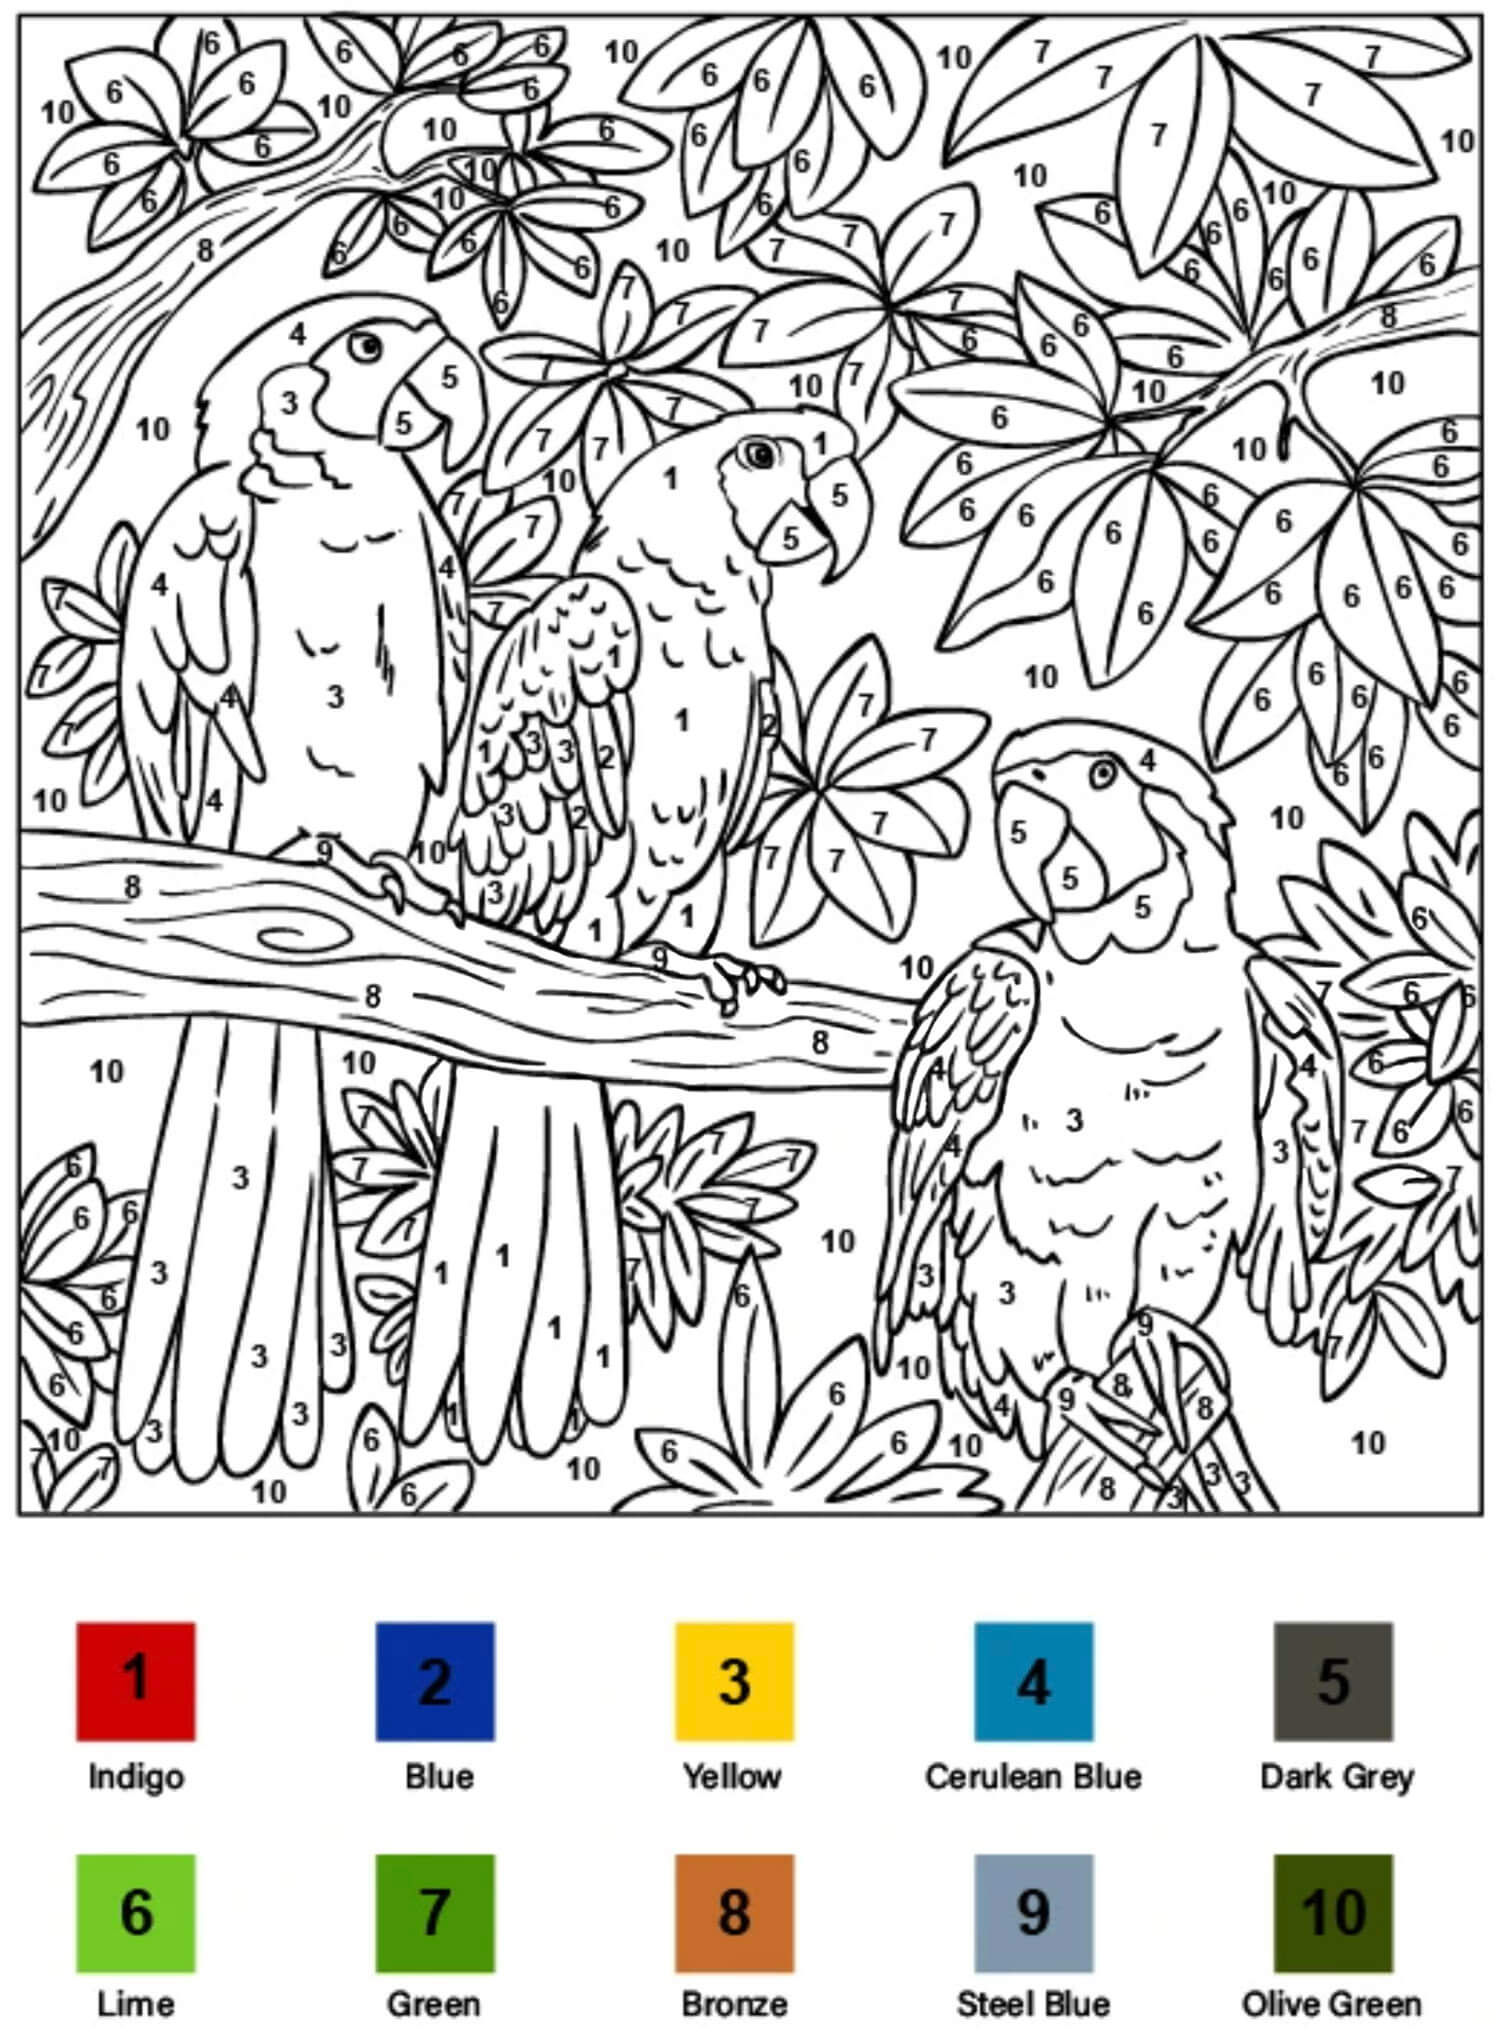 Three Parrots Color by Number Color By Number